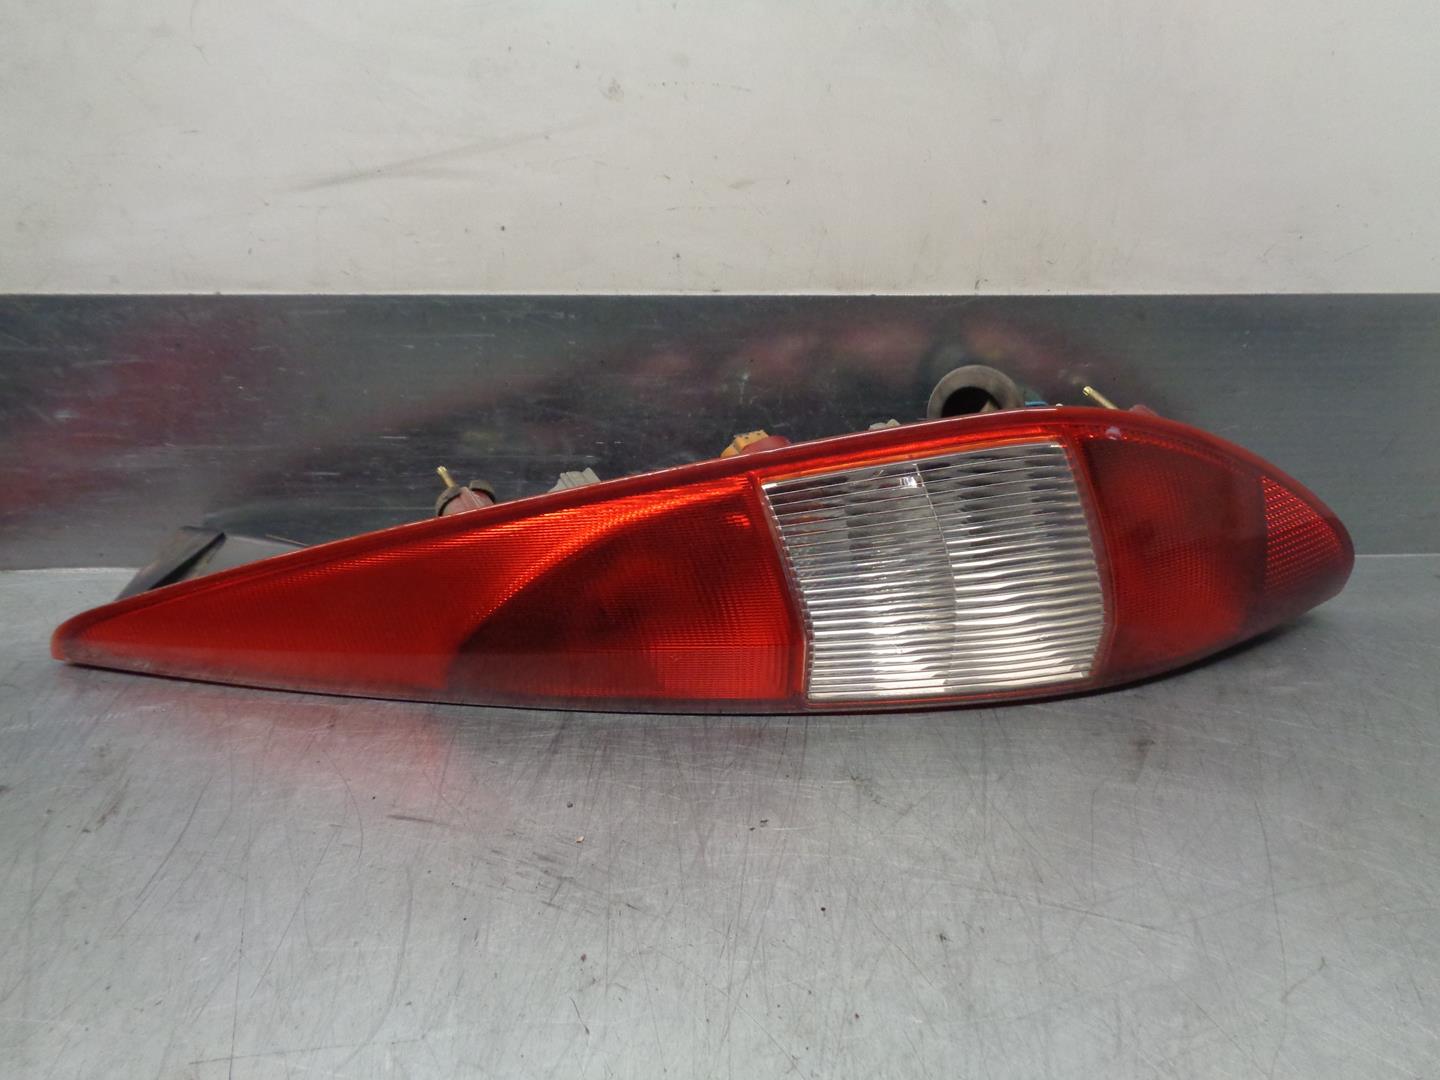 FORD Mondeo 3 generation (2000-2007) Rear Right Taillight Lamp 1S7113404C, 5PUERTAS 19864457